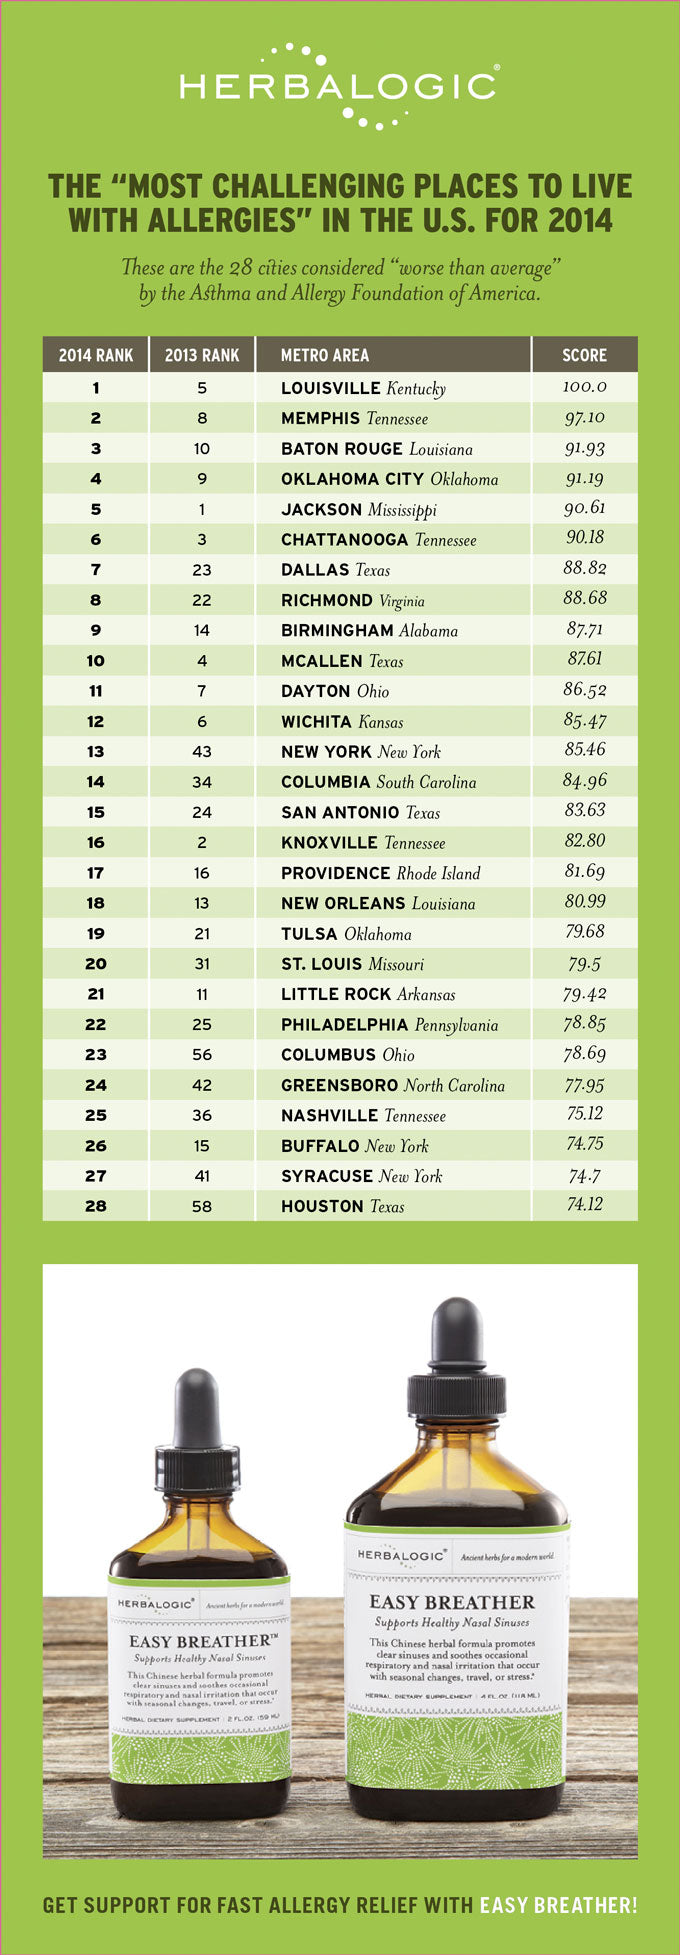 The Worst Cities for Allergies in the U.S. in 2014: If you suffer from season allergies to pollen or mold, you may want to check out this list of the worst places to live, according to the Asthma and Allergy Foundation of America. If your city is ranked on the list, you may want to get some Easy Breather, Herbalogic's fast-acting herbal remedy for allergies.